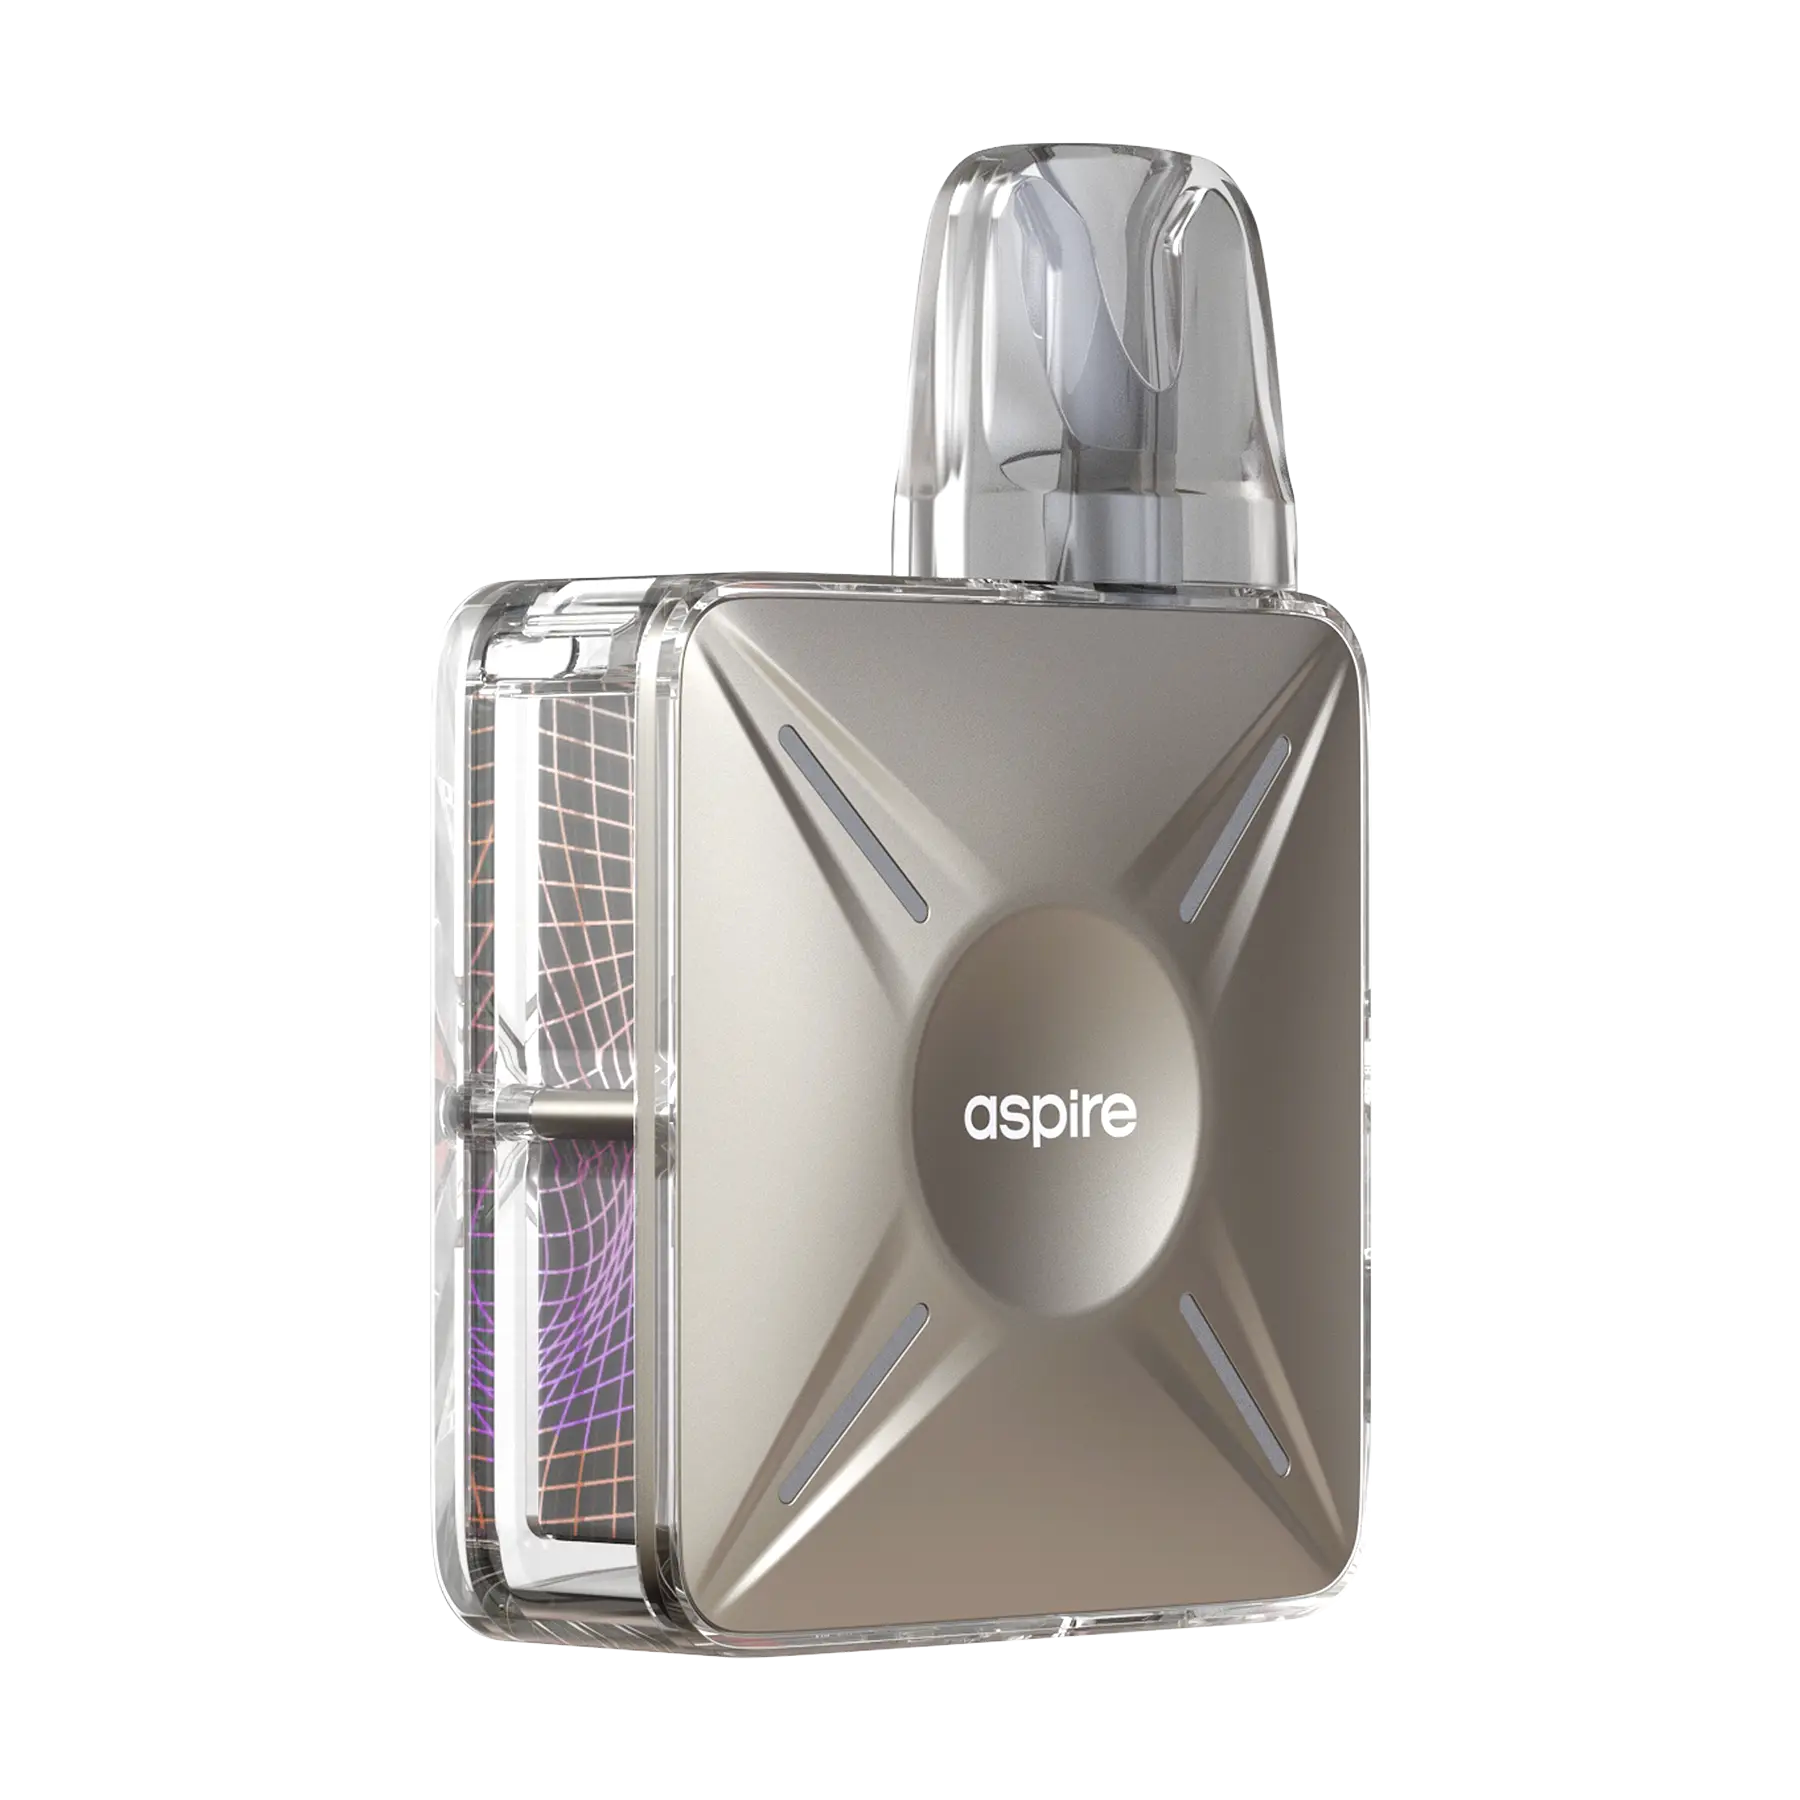 Aspire's Cyber X gives you the optimal balance of style and portability by putting futuristic transparent cyber elements into a thin and portable design.